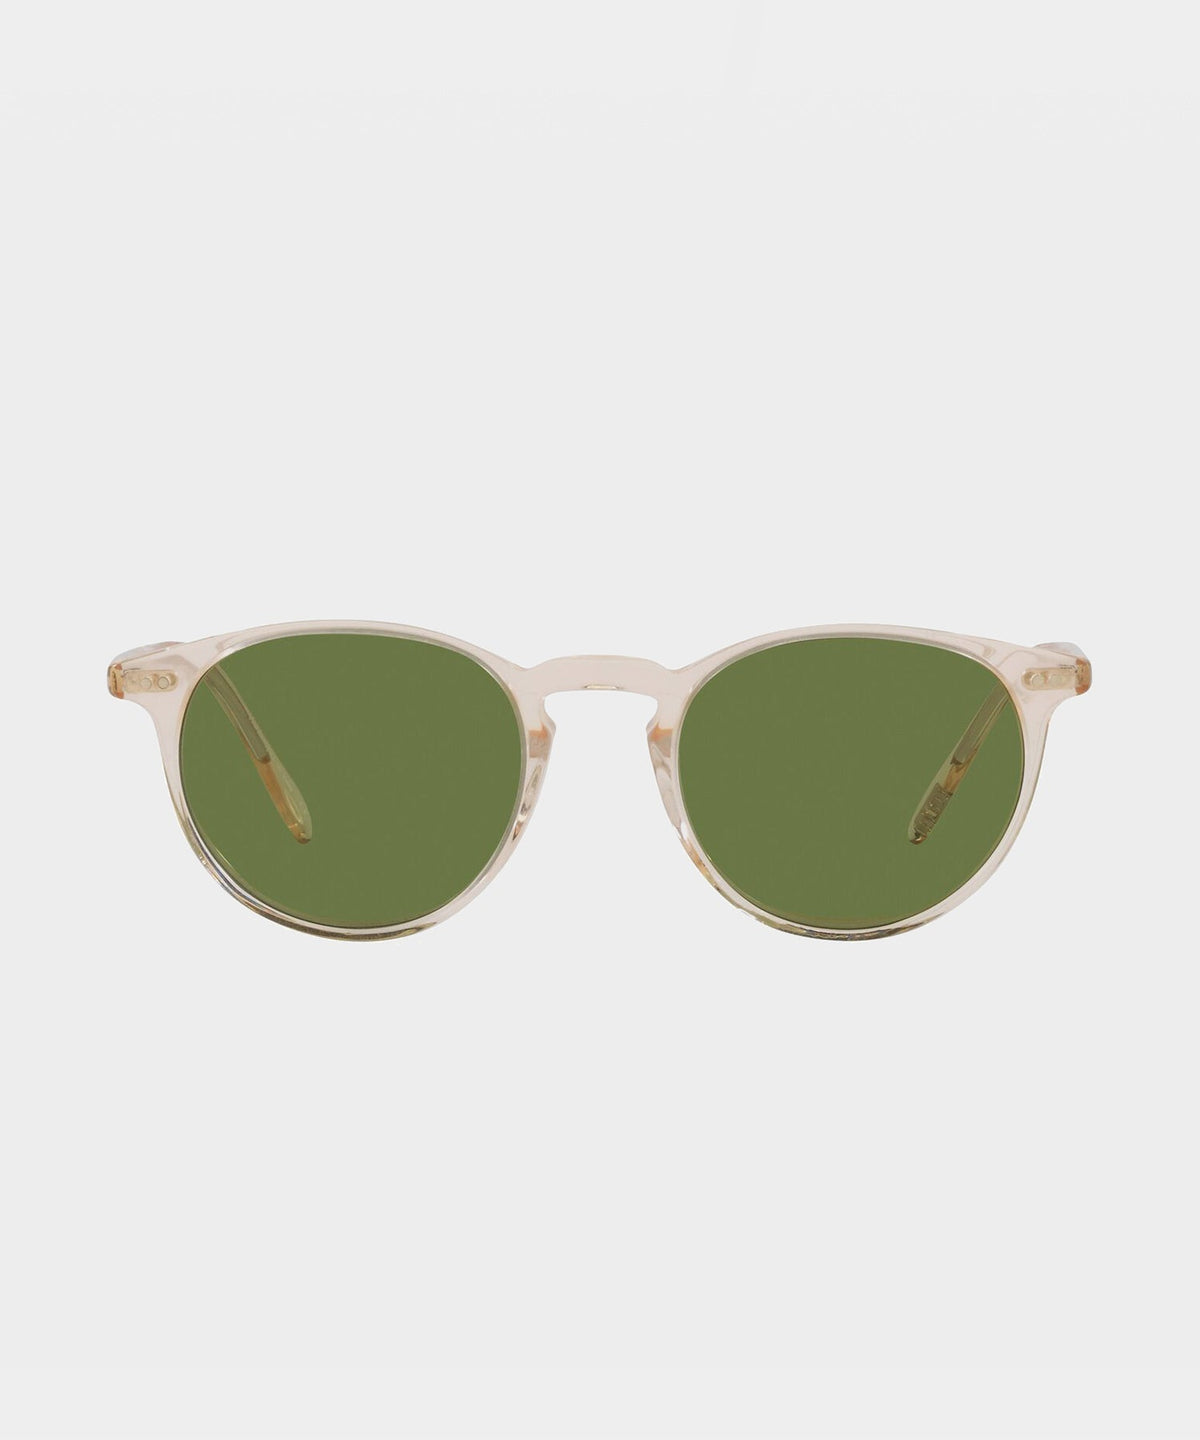 Oliver Peoples Riley Sunglasses in Buff